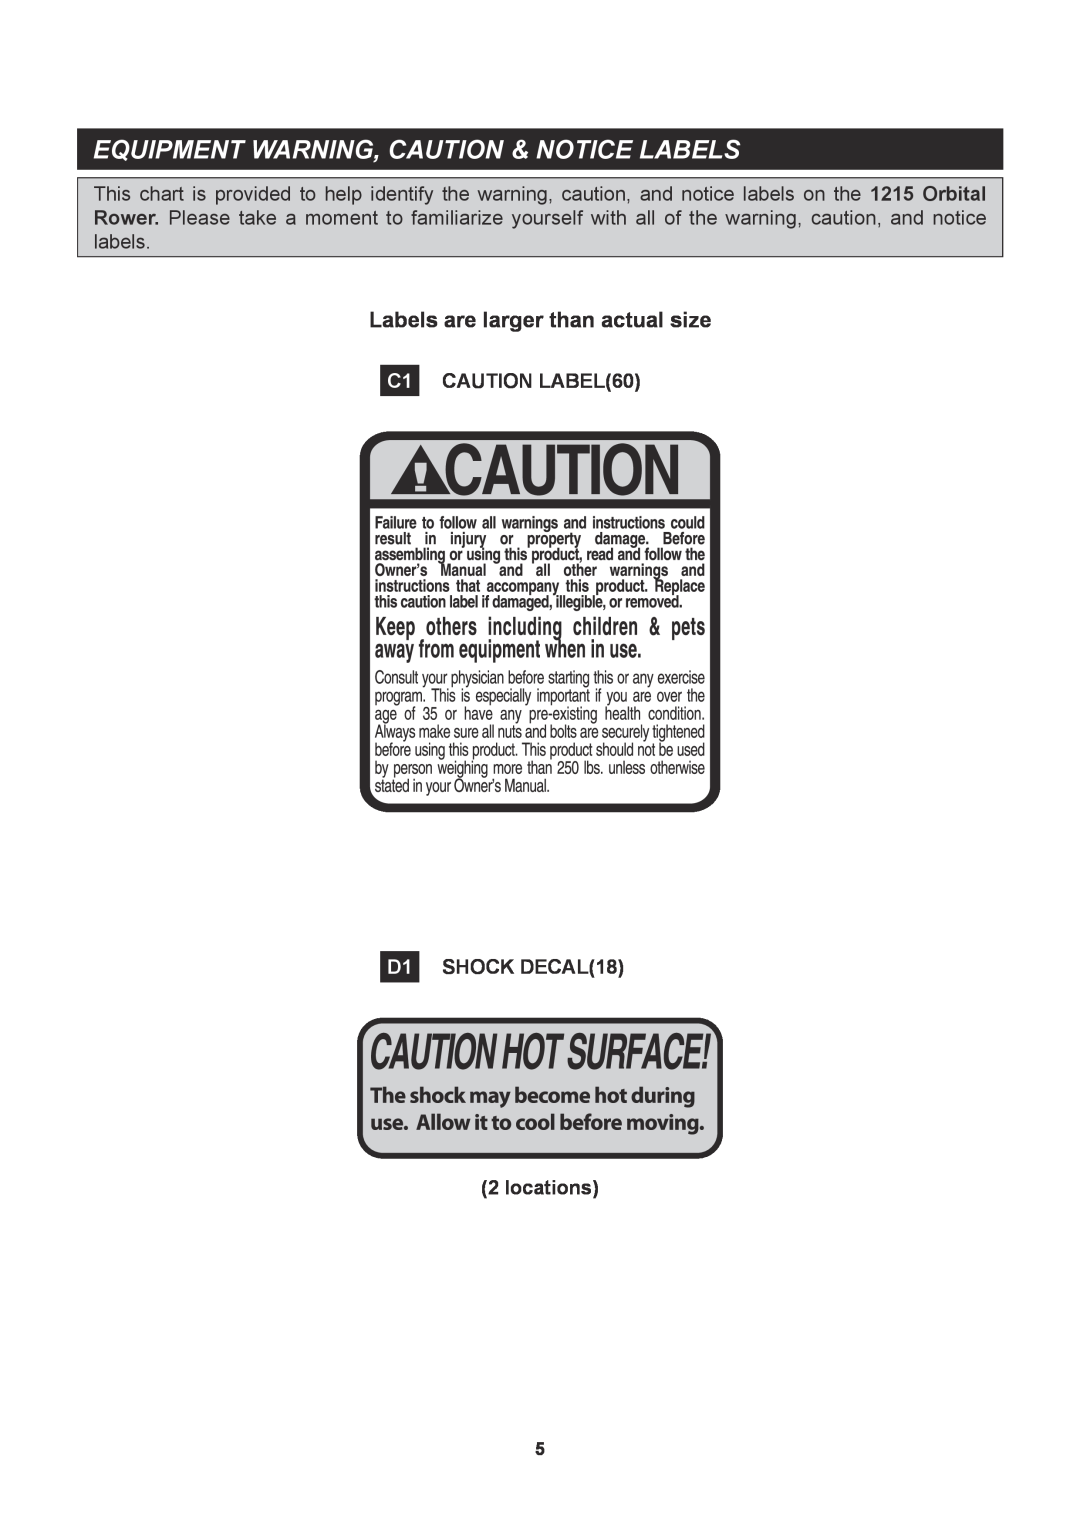 Sears 35-1215B owner manual Equipment Warning, Caution & Notice Labels, Labels are larger than actual size 